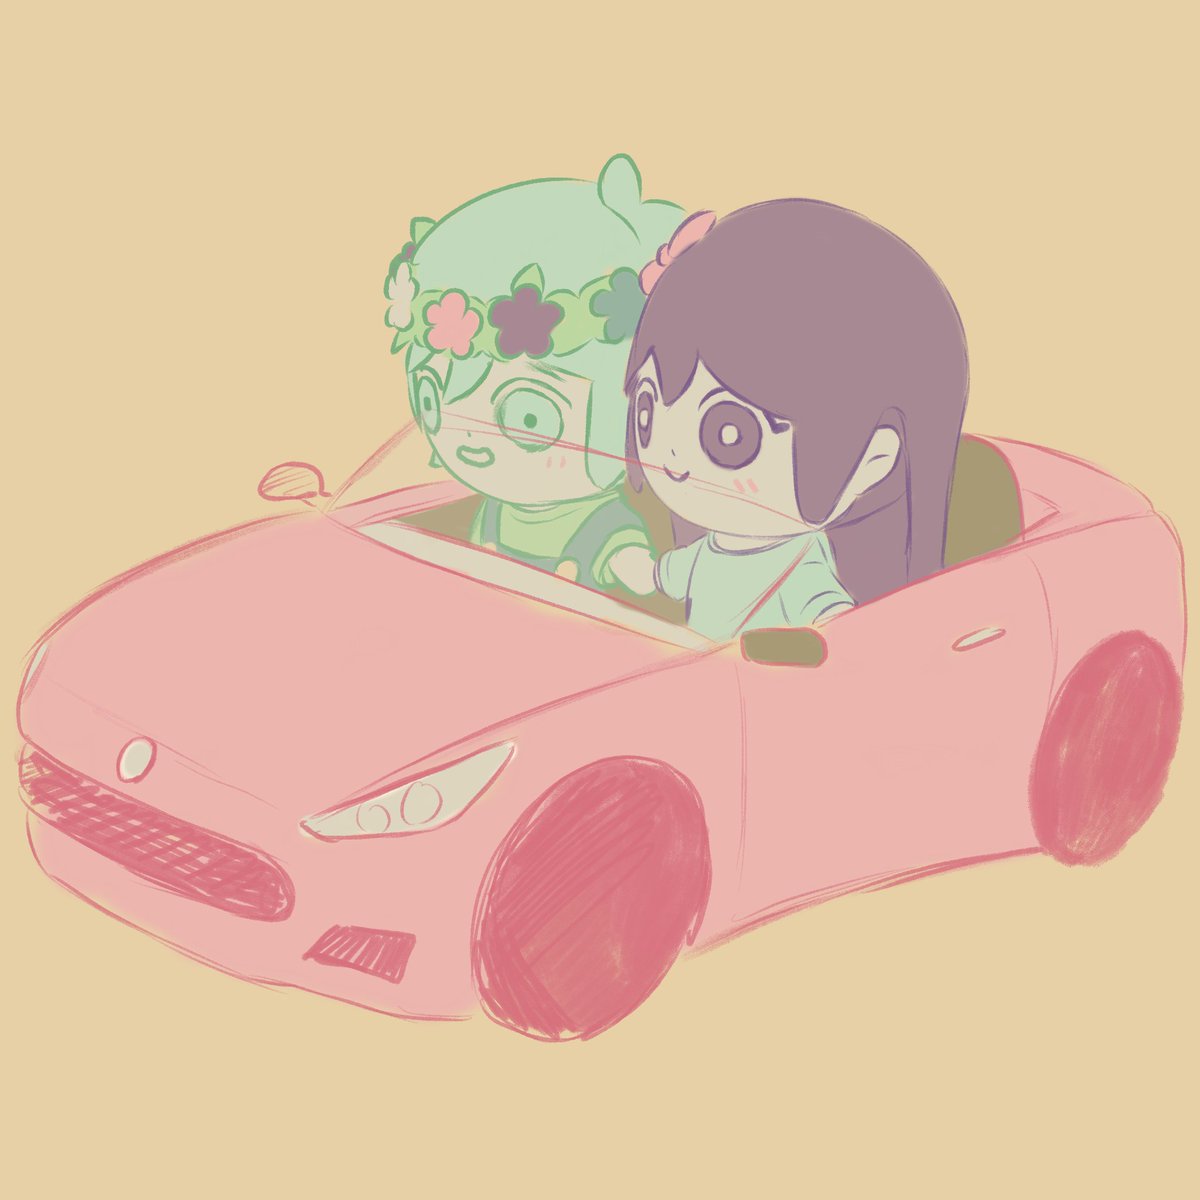 💖 Participating in #photobombweek!
Prompt (2/24): Comical Scene
Basil and Aubrey plushies going for a ride
#OMORIFANART